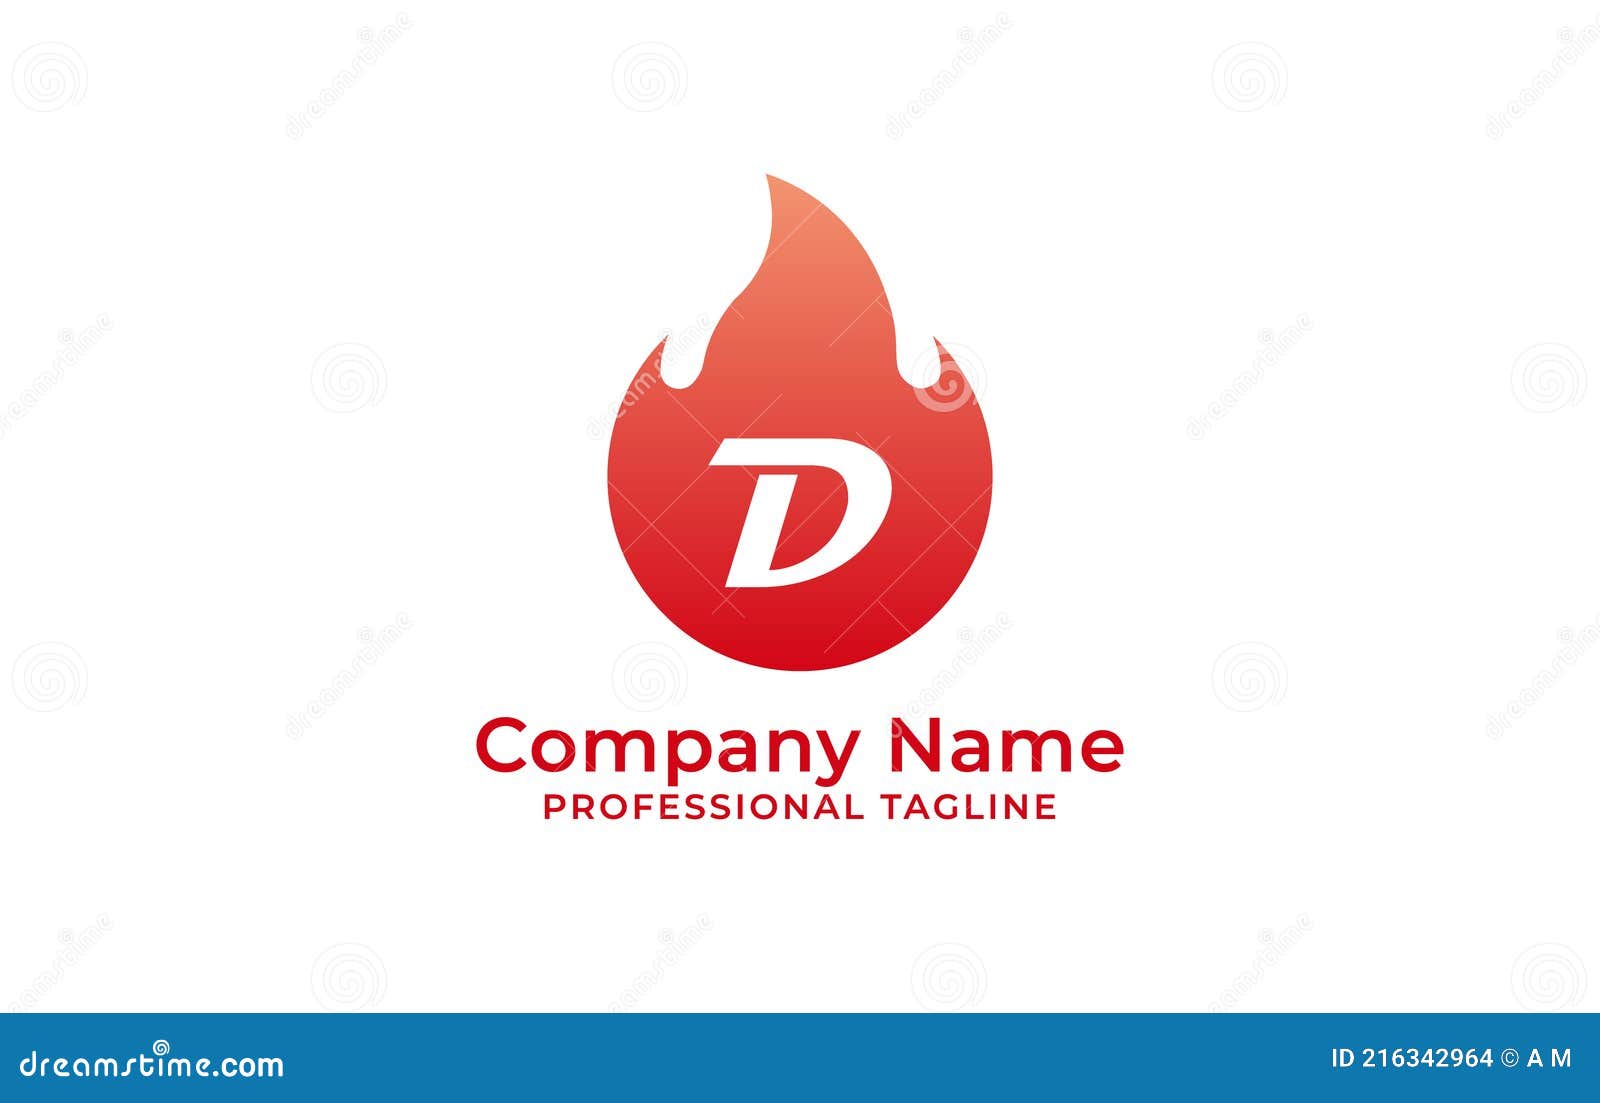 D on Fire Logo Design Template, D Logo in Fire Flame, Vector Eps File ...